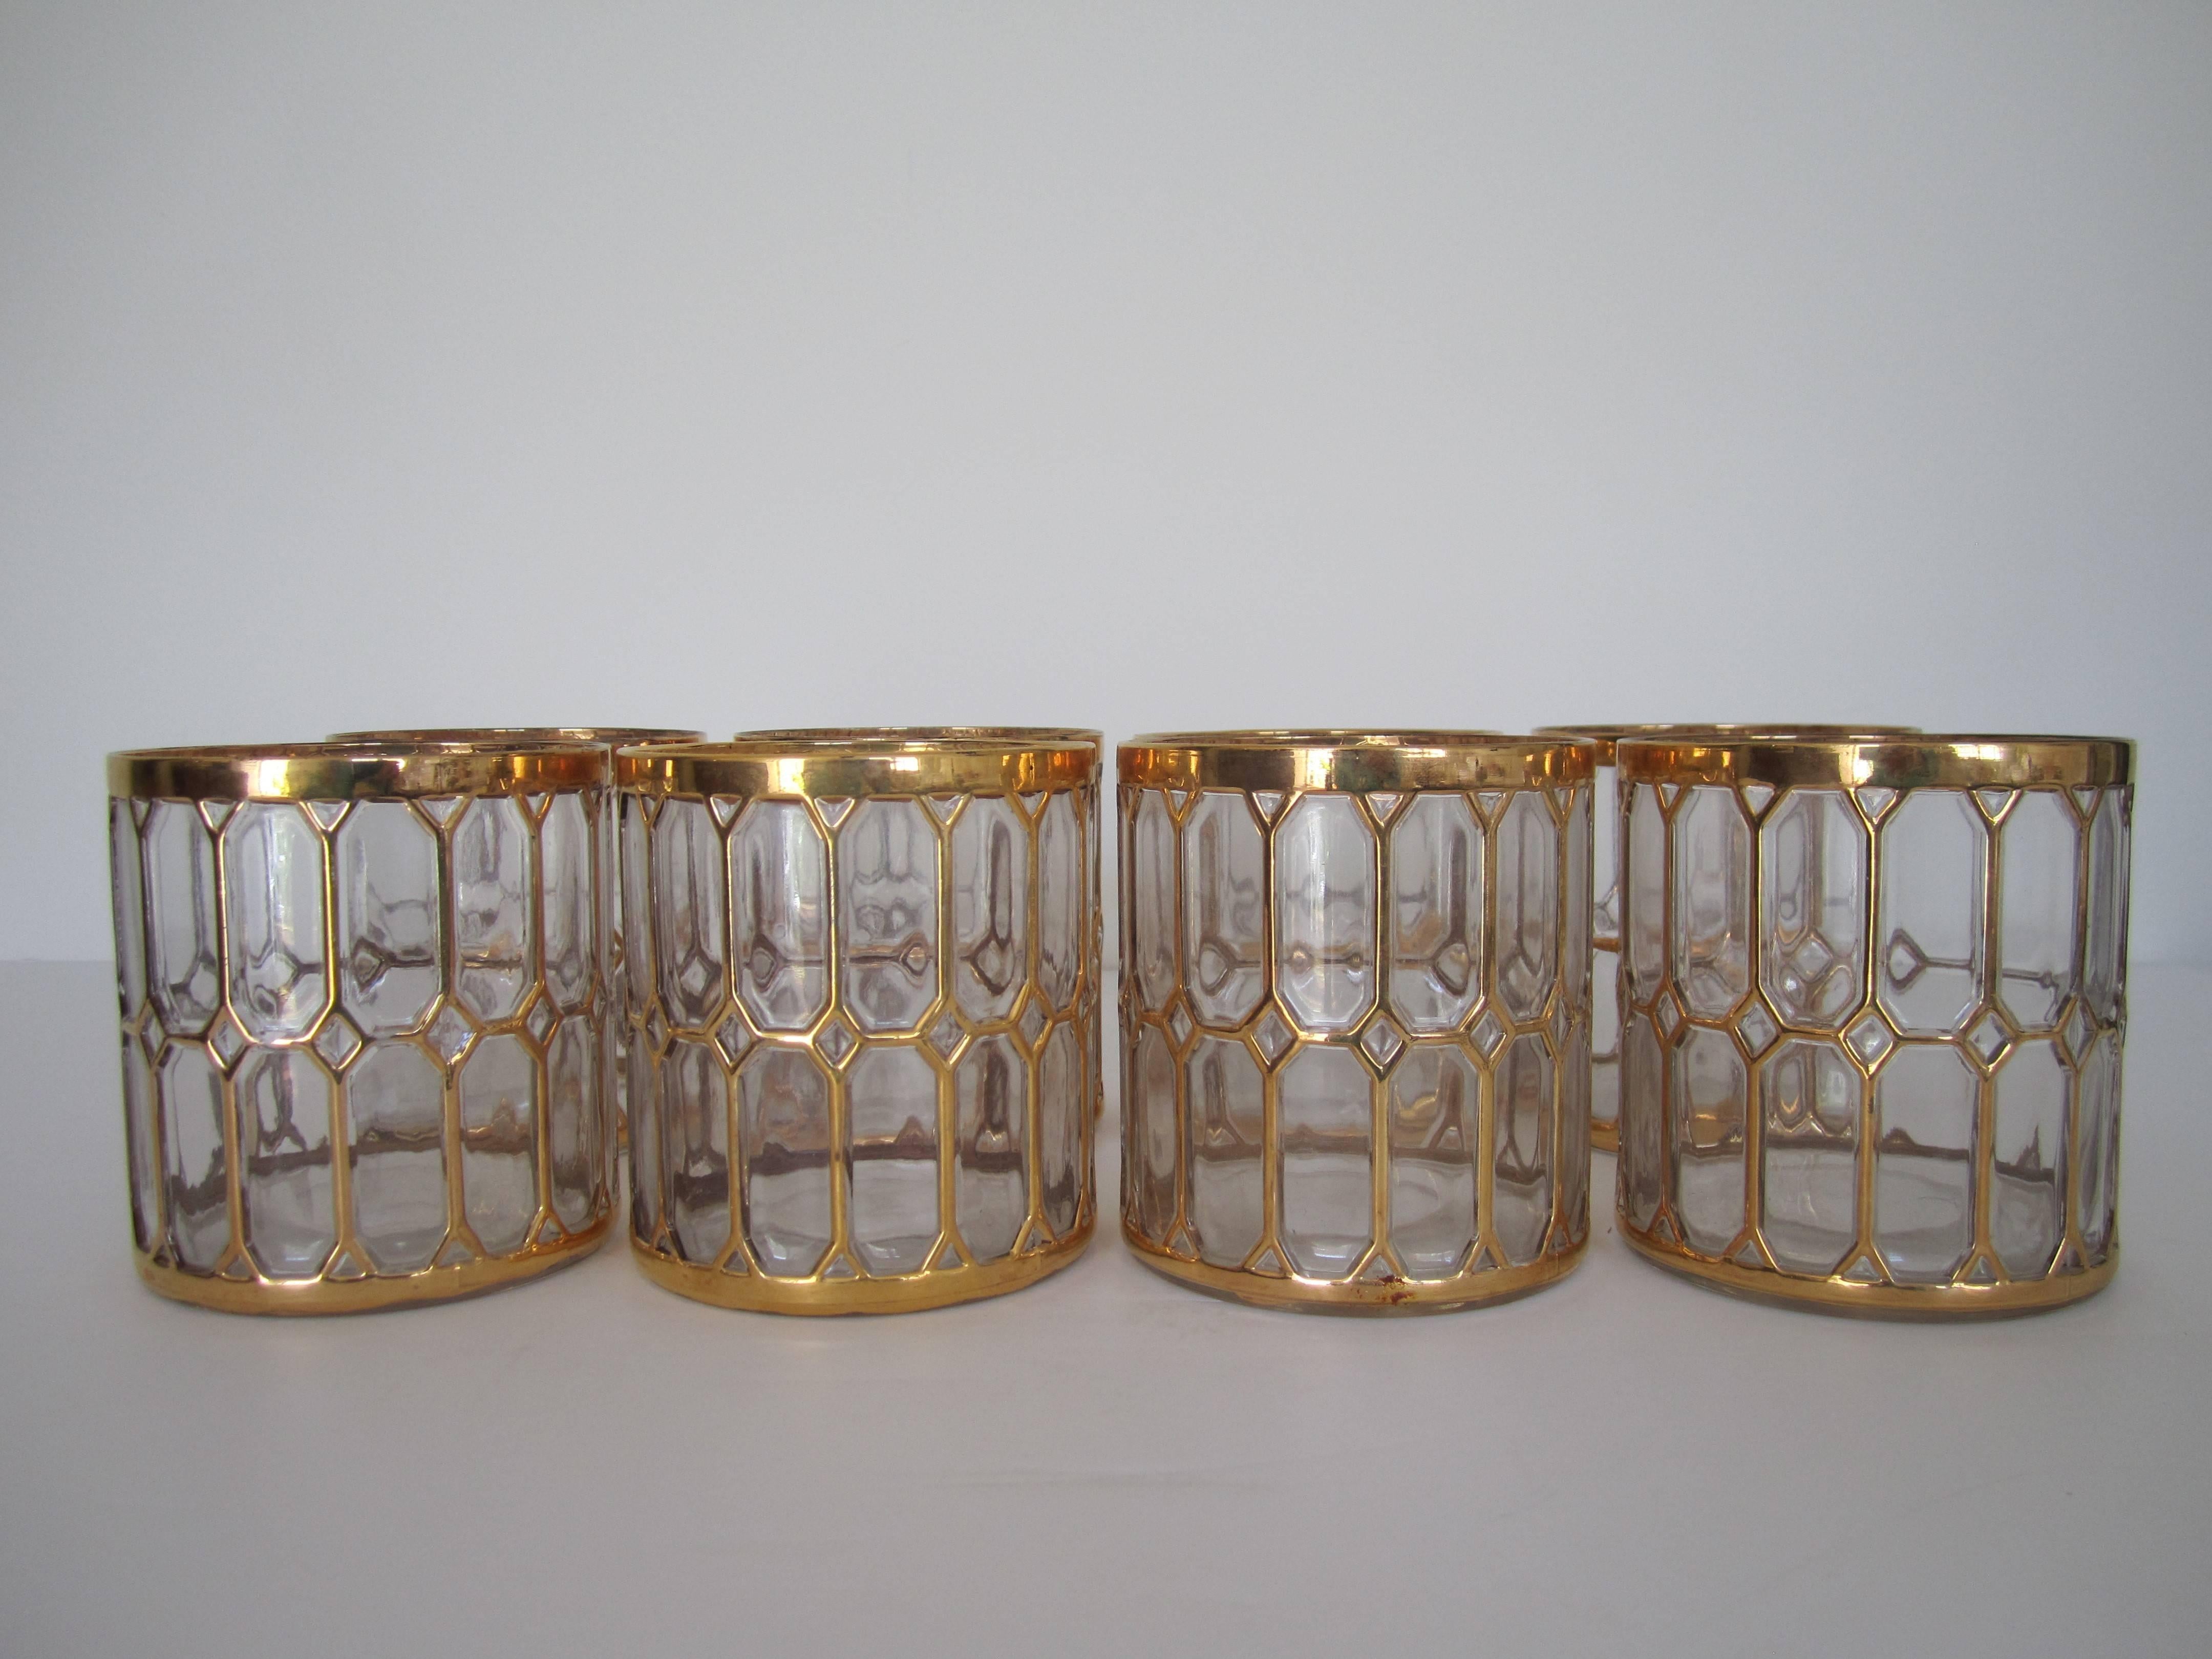 Eight stunning vintage 'rocks' cocktail glasses by the Imperial Glass Company. These glasses are in the Sortijas de Oro pattern with 24-karat gold detailing. Item available here online. By request, item can be made available by appointment to the